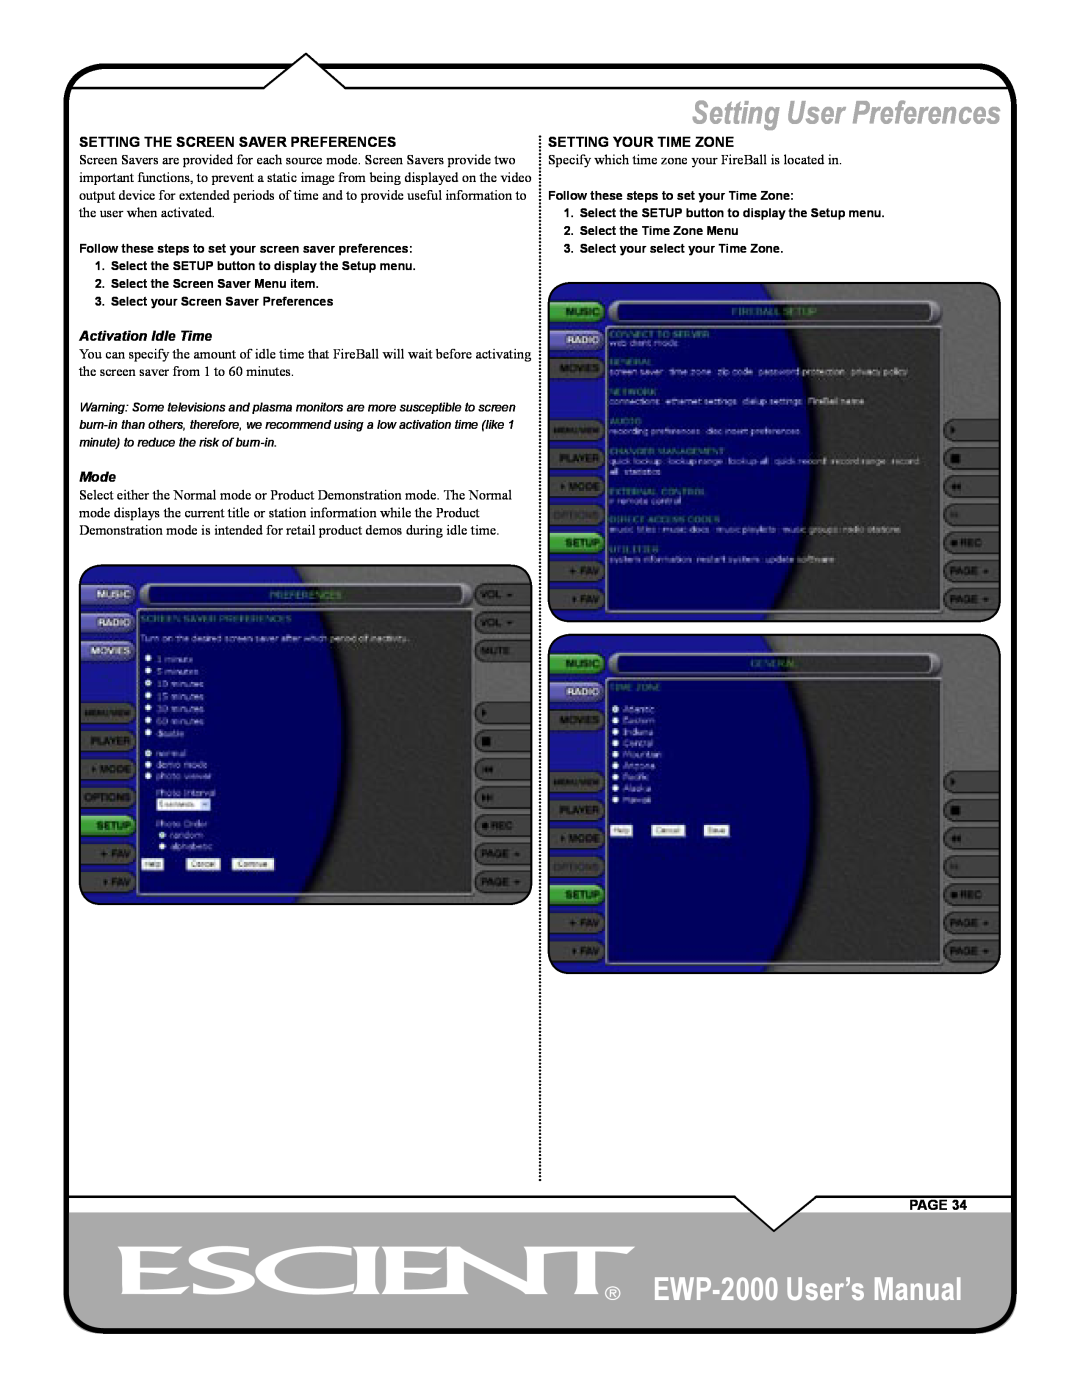 Escient Setting User Preferences, EWP-2000 User’s Manual, Setting The Screen Saver Preferences, Setting Your Time Zone 